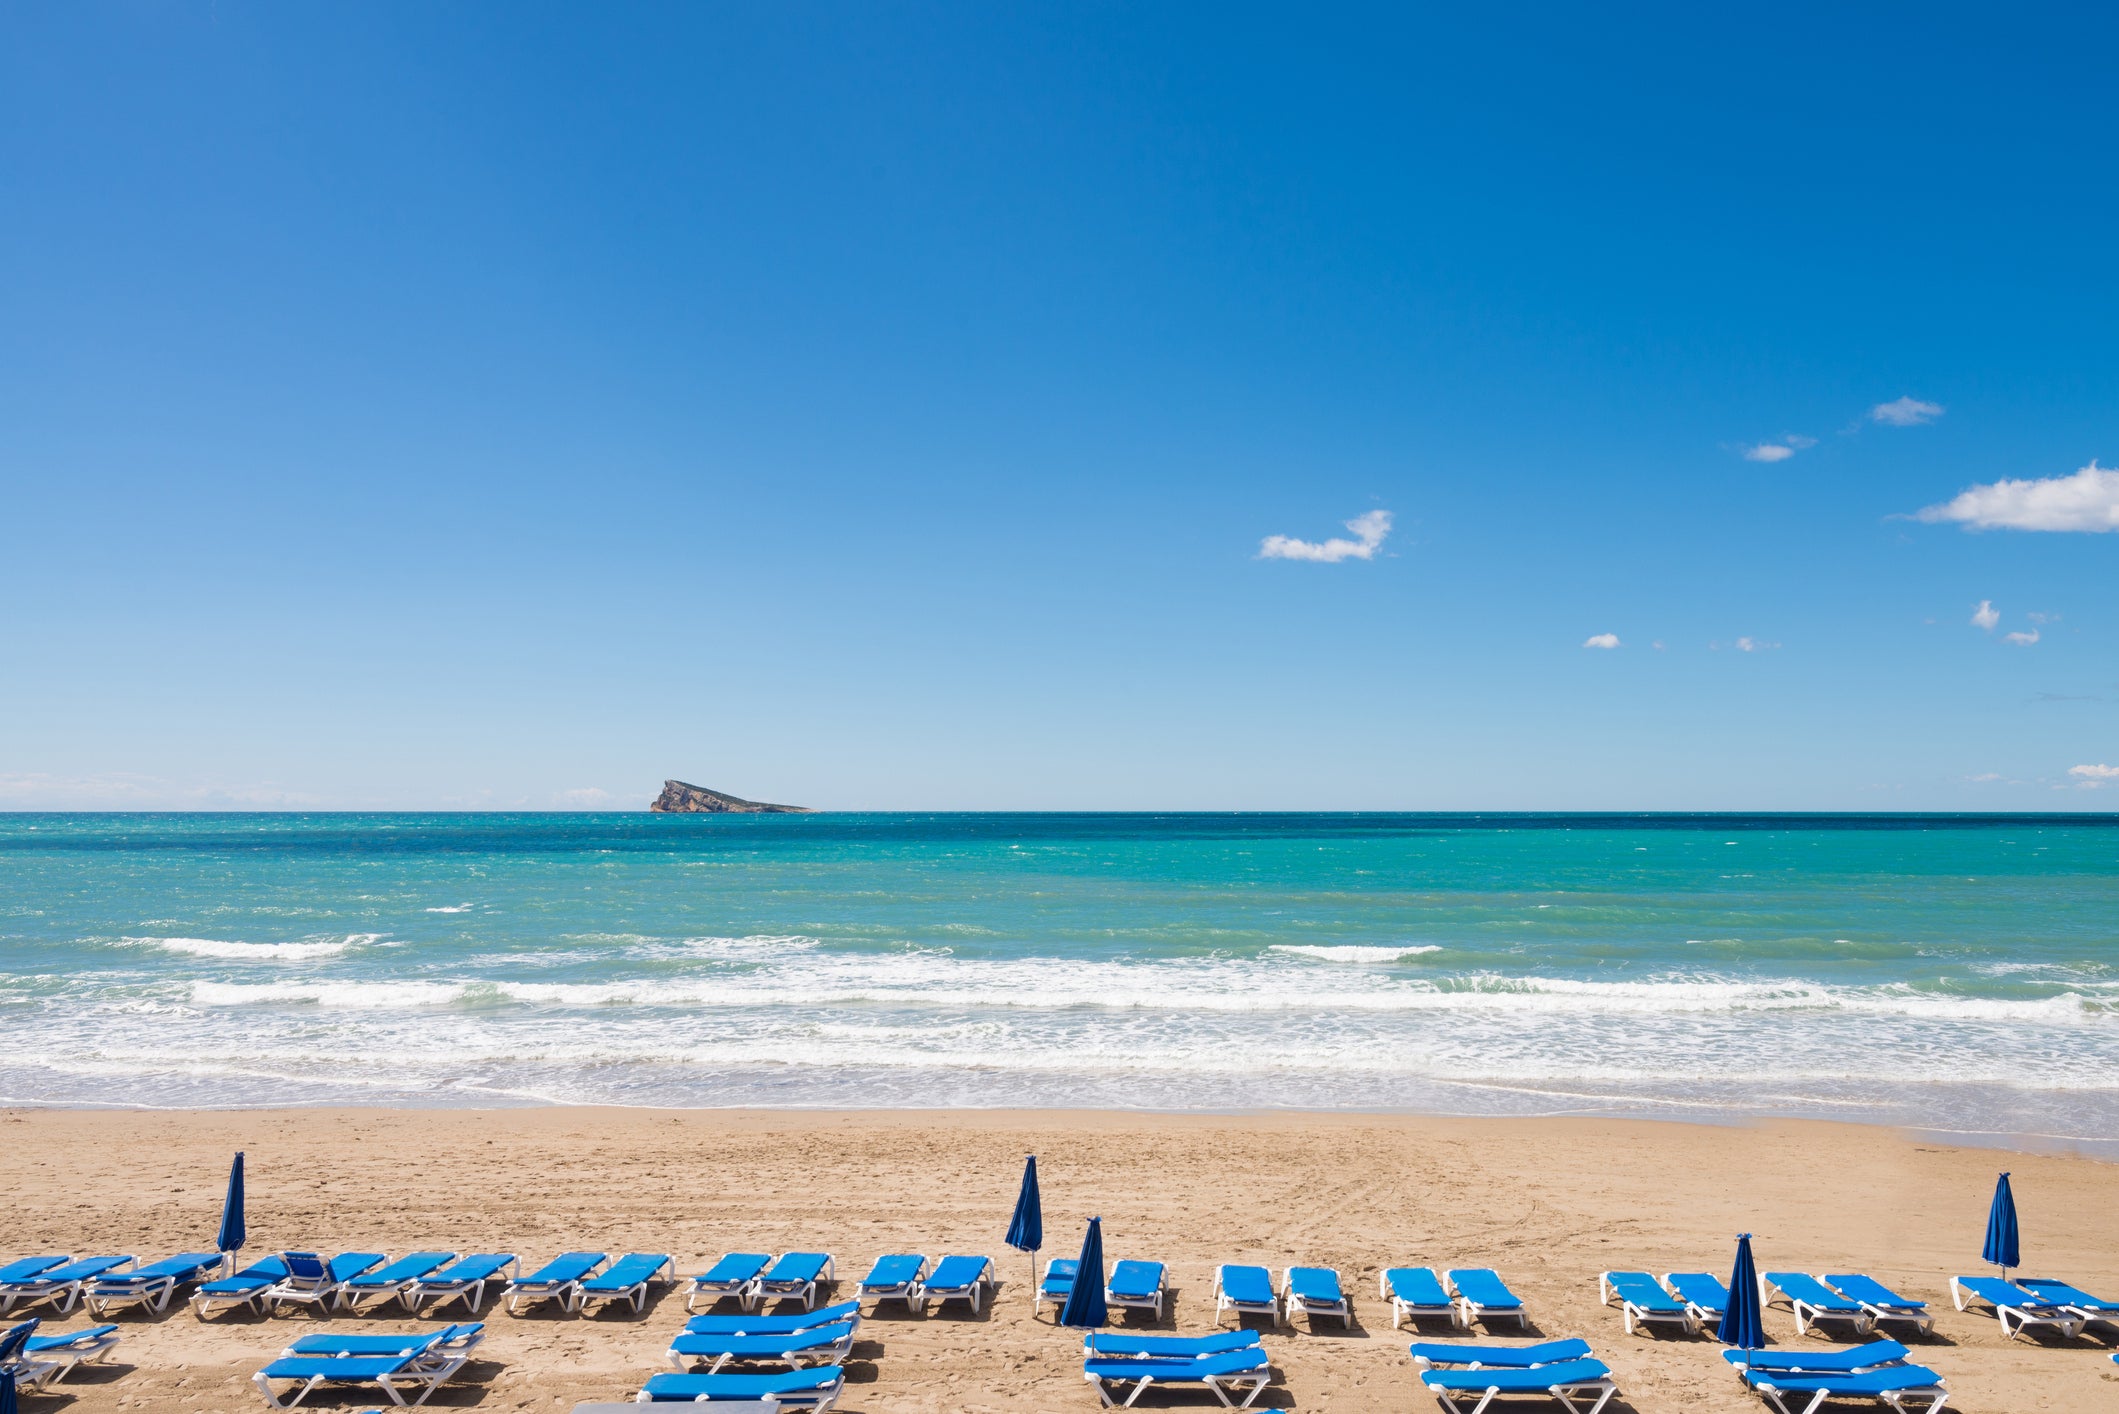 Benidorm is a popular holiday spot for Britons